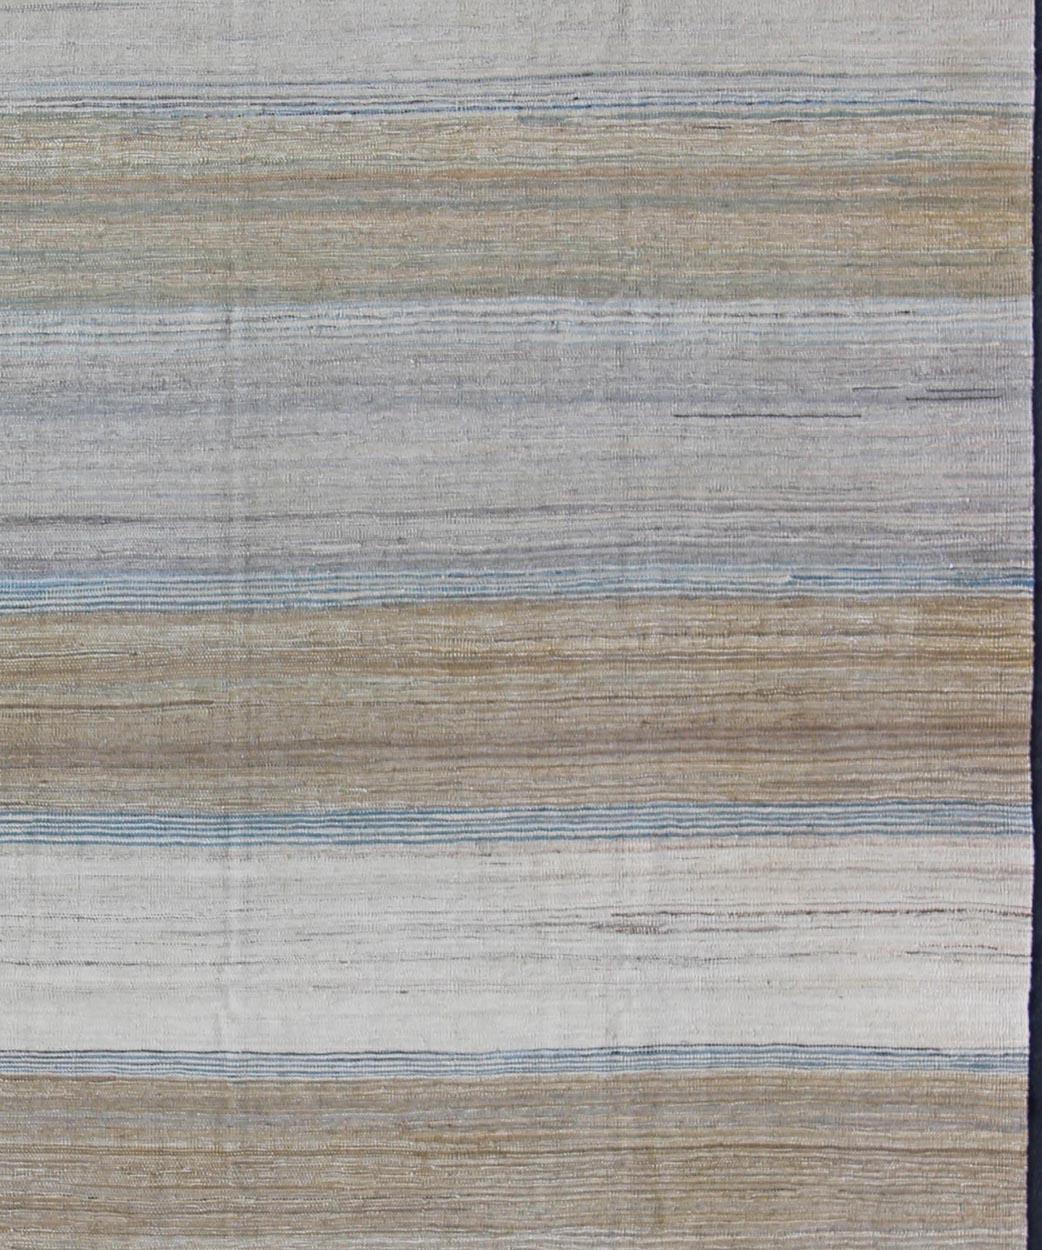 Keivan Woven Arts-Flat-weave Kilim rug with stripes with modern design in shades of blue, taupe gray and cream, rug afg-29515, country of origin / type: Afghanistan / Kilim

This playful piece features a Classic stripe design that evokes casual and